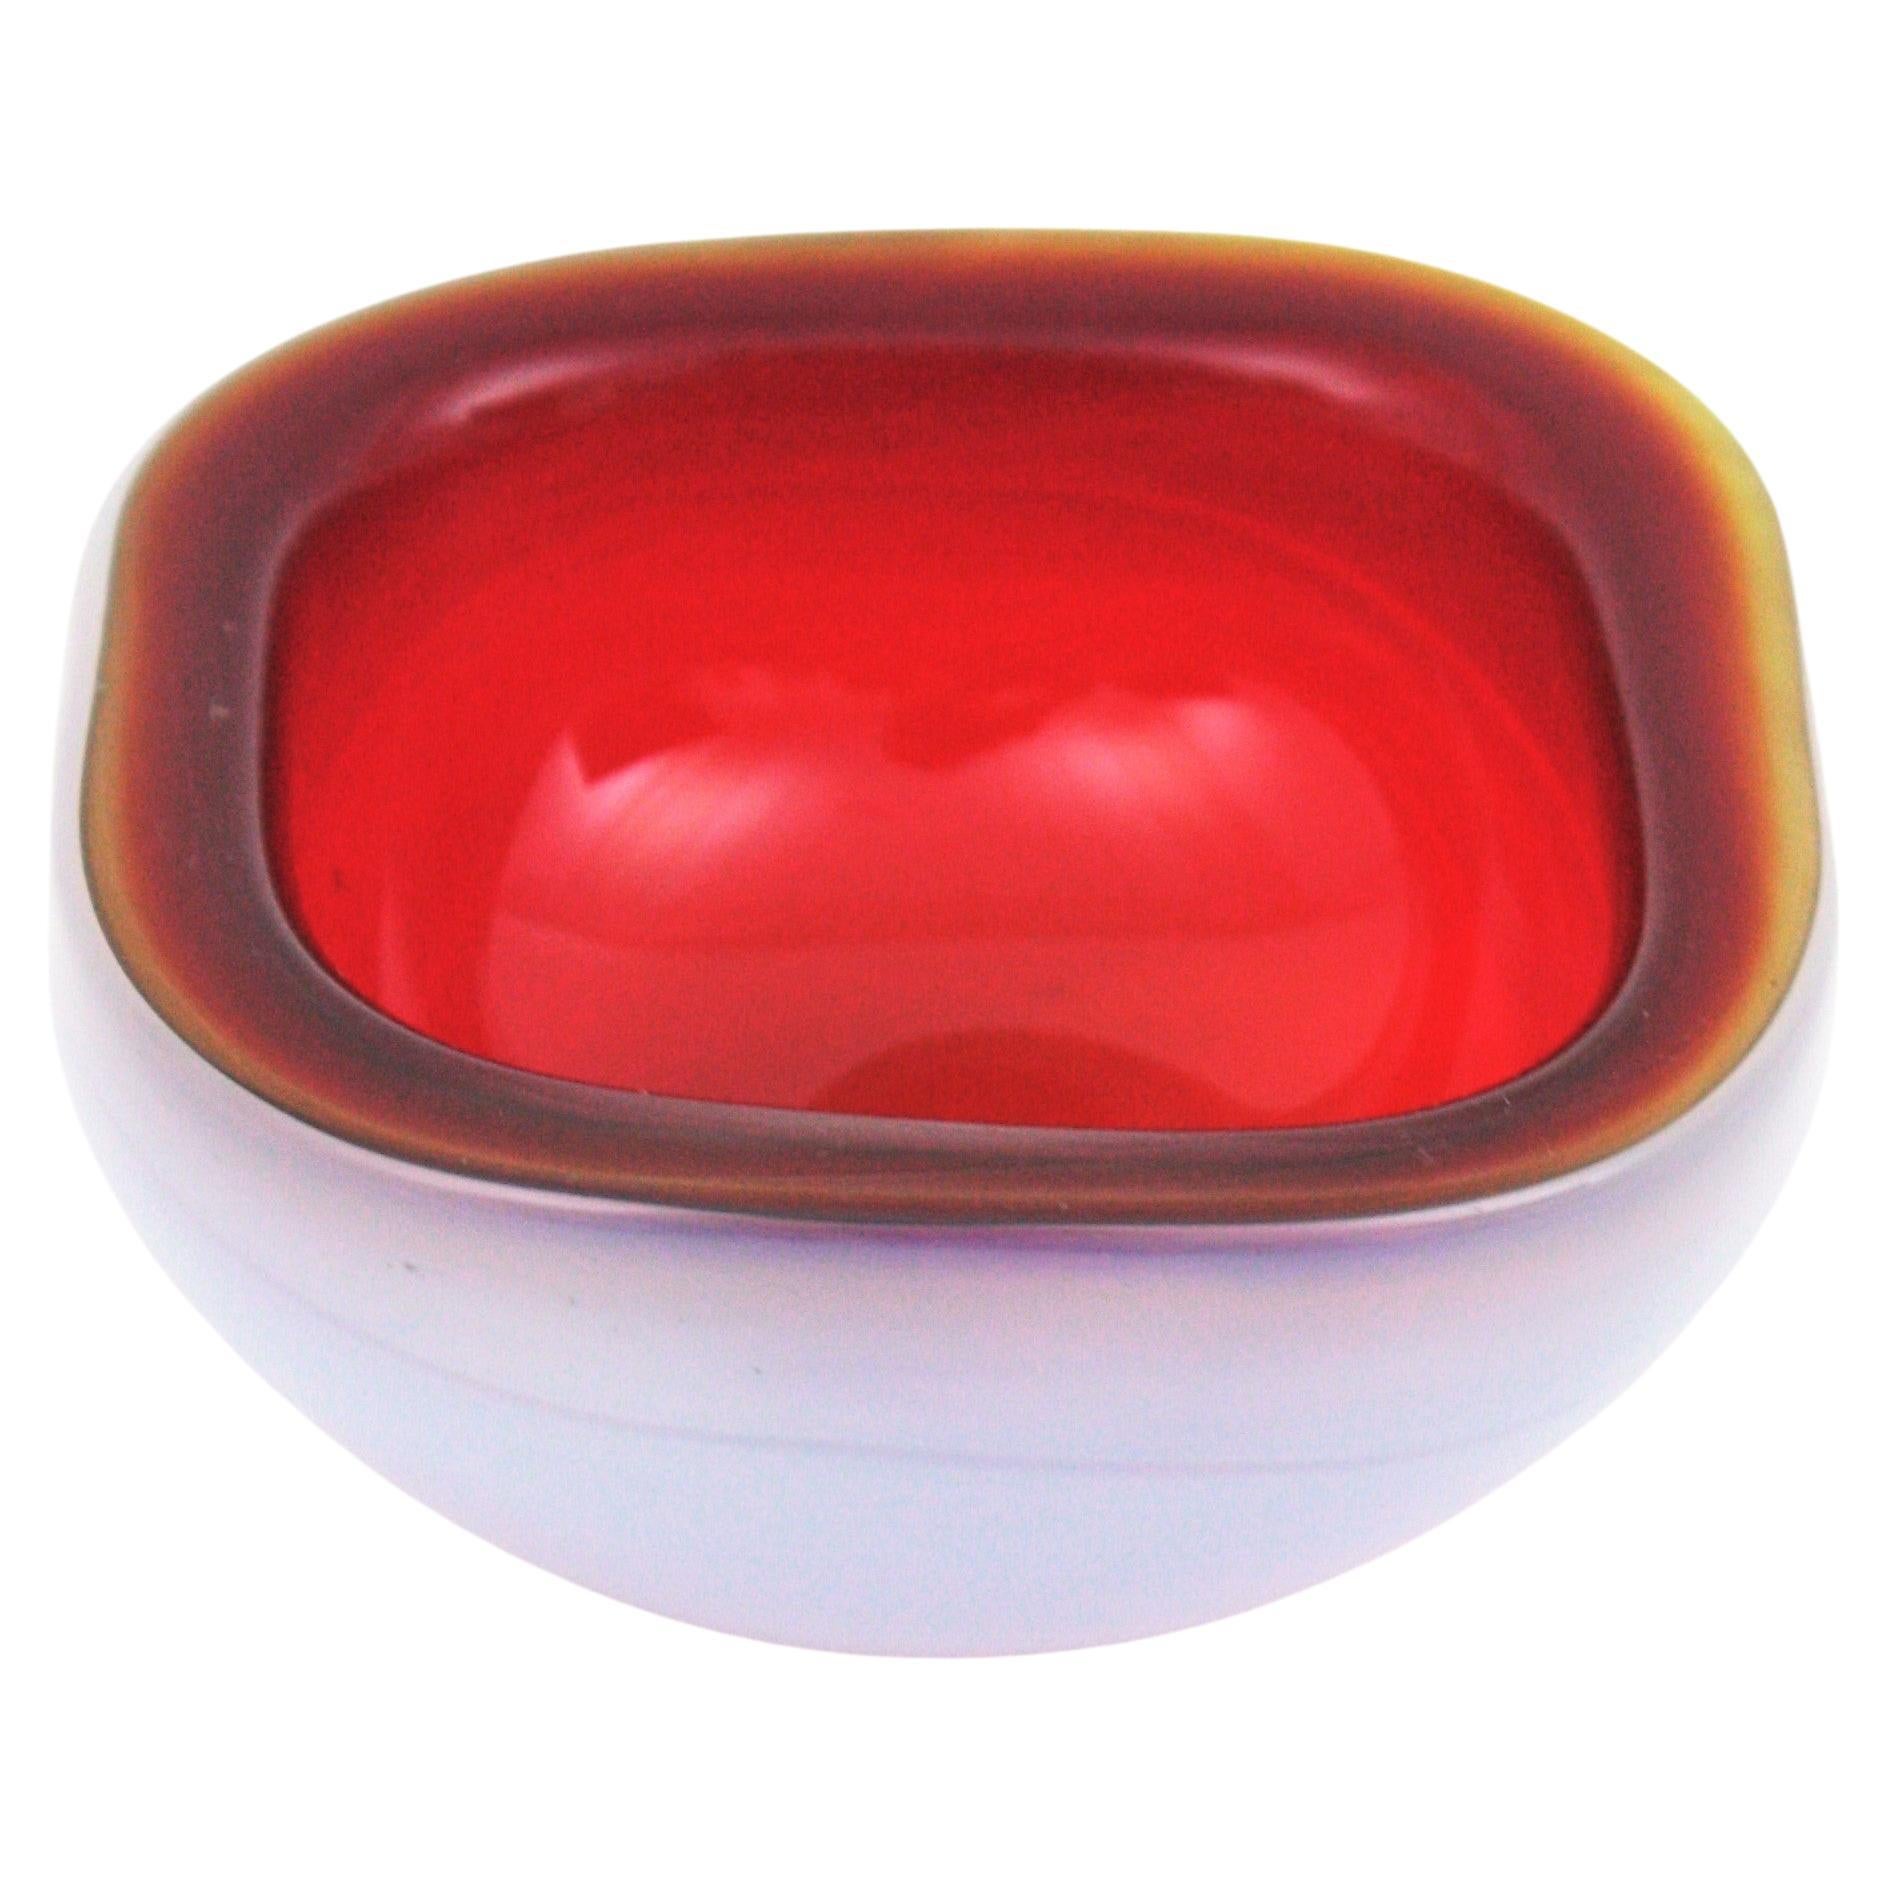 Midcentury hand blown Murano triple layered Sommerso bowl manufactured by Archimede Seguso / Seguso Vetri d'Arte, Italy 1950s.
Opal white, red and yellow glass cased into clear glass using the Sommerso technique.
Changing appearance on a black or